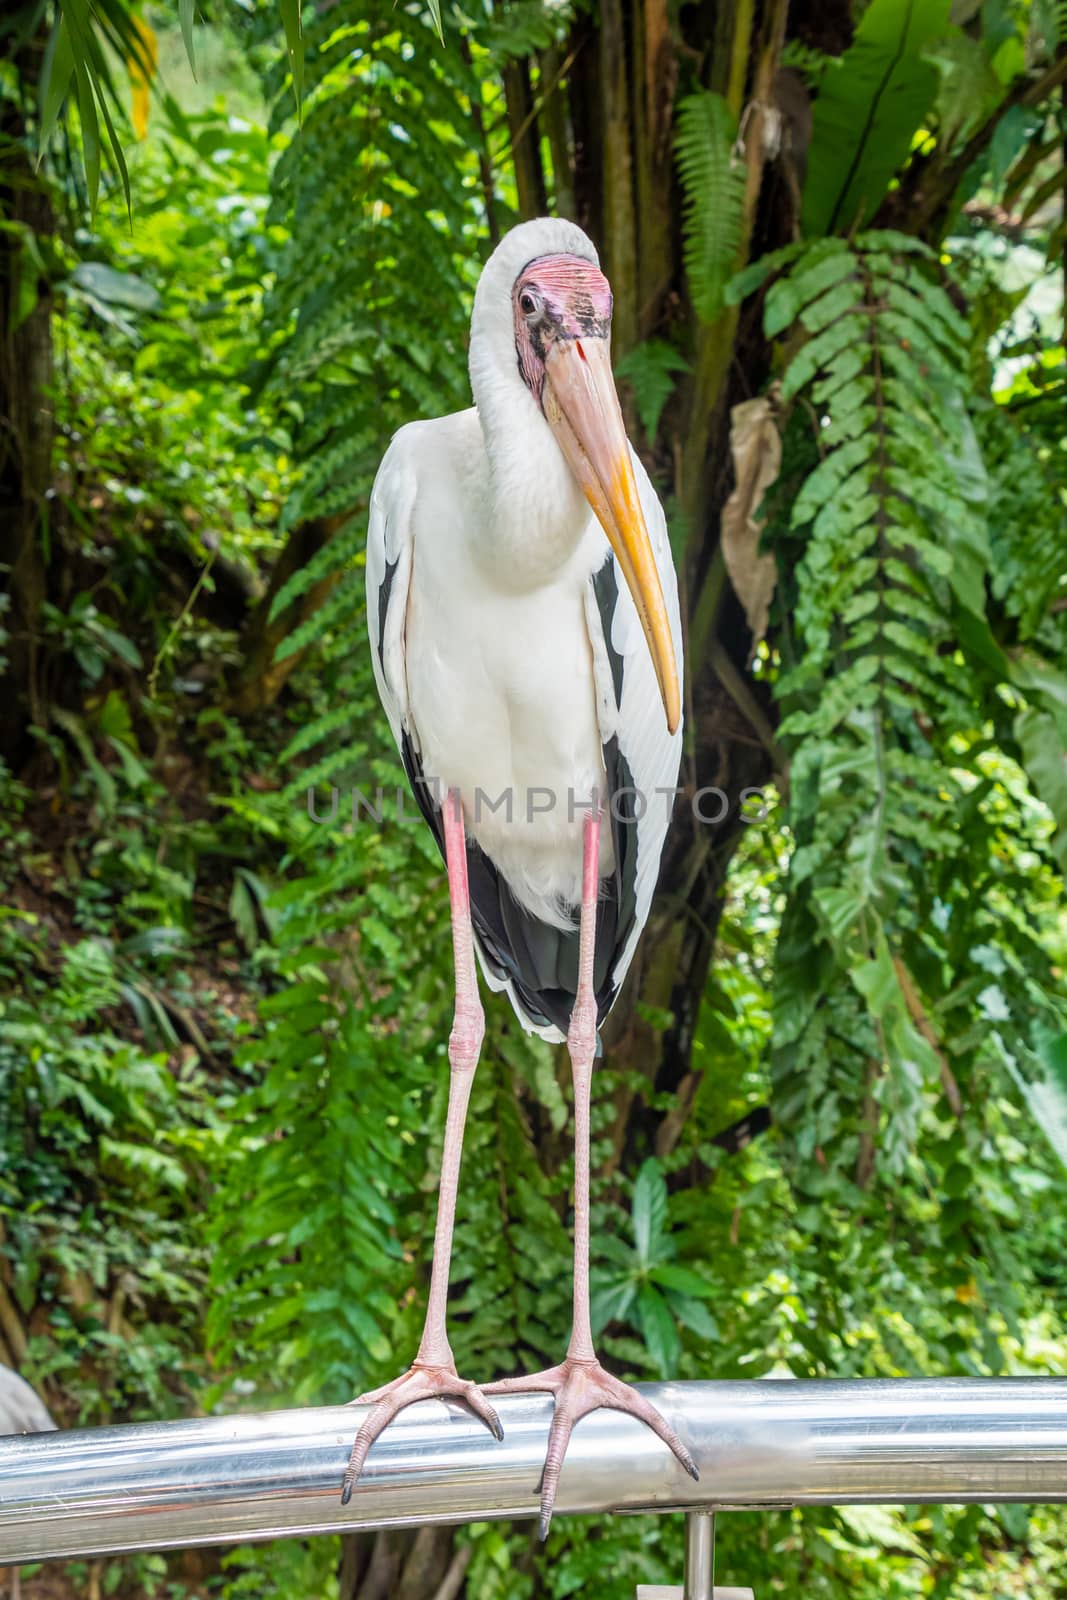 Yellow-billed stork in front of rain forest vegetation in Malaysia by MXW_Stock